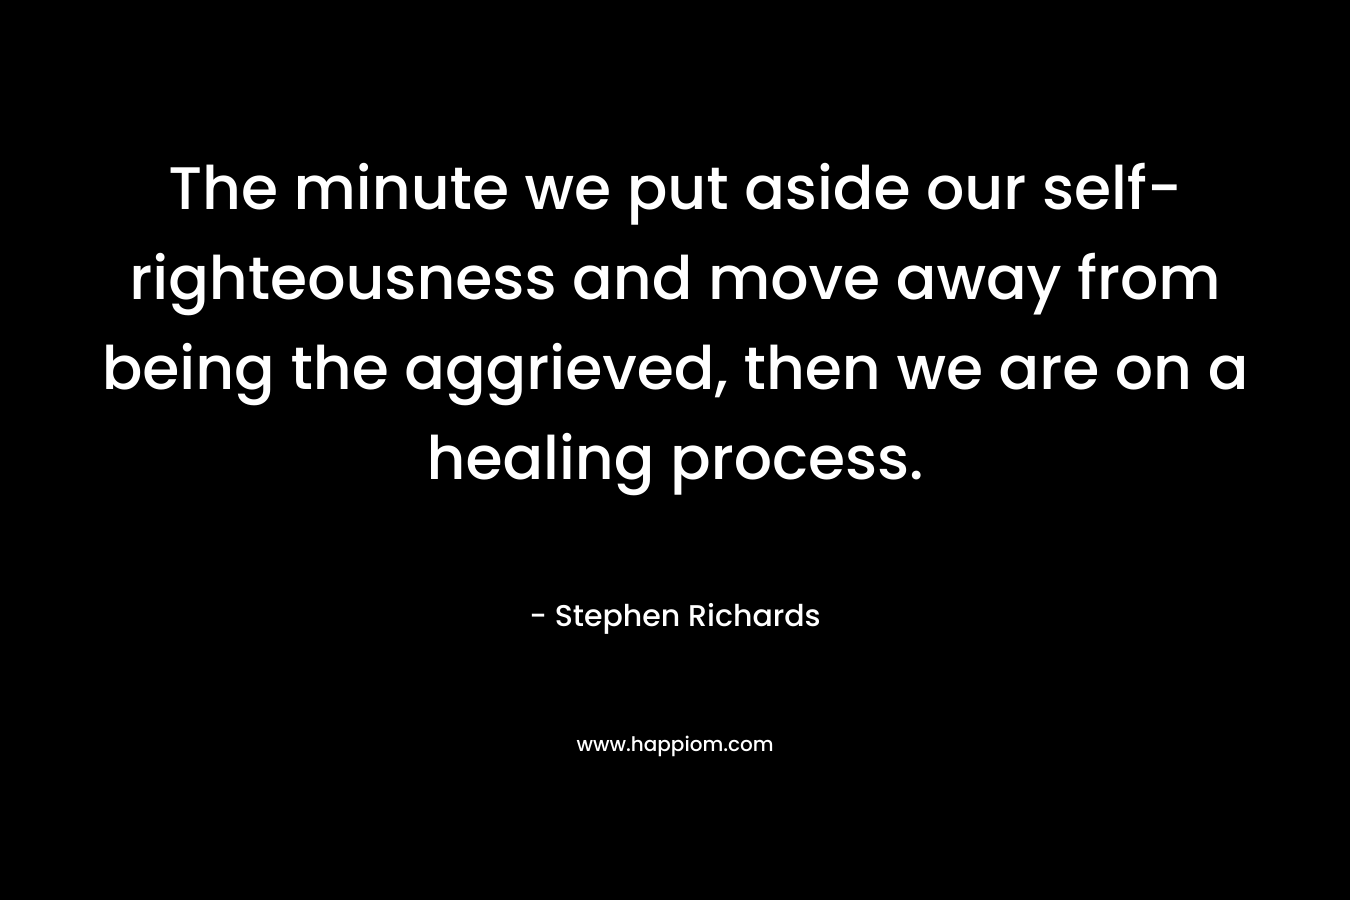 The minute we put aside our self-righteousness and move away from being the aggrieved, then we are on a healing process. – Stephen Richards